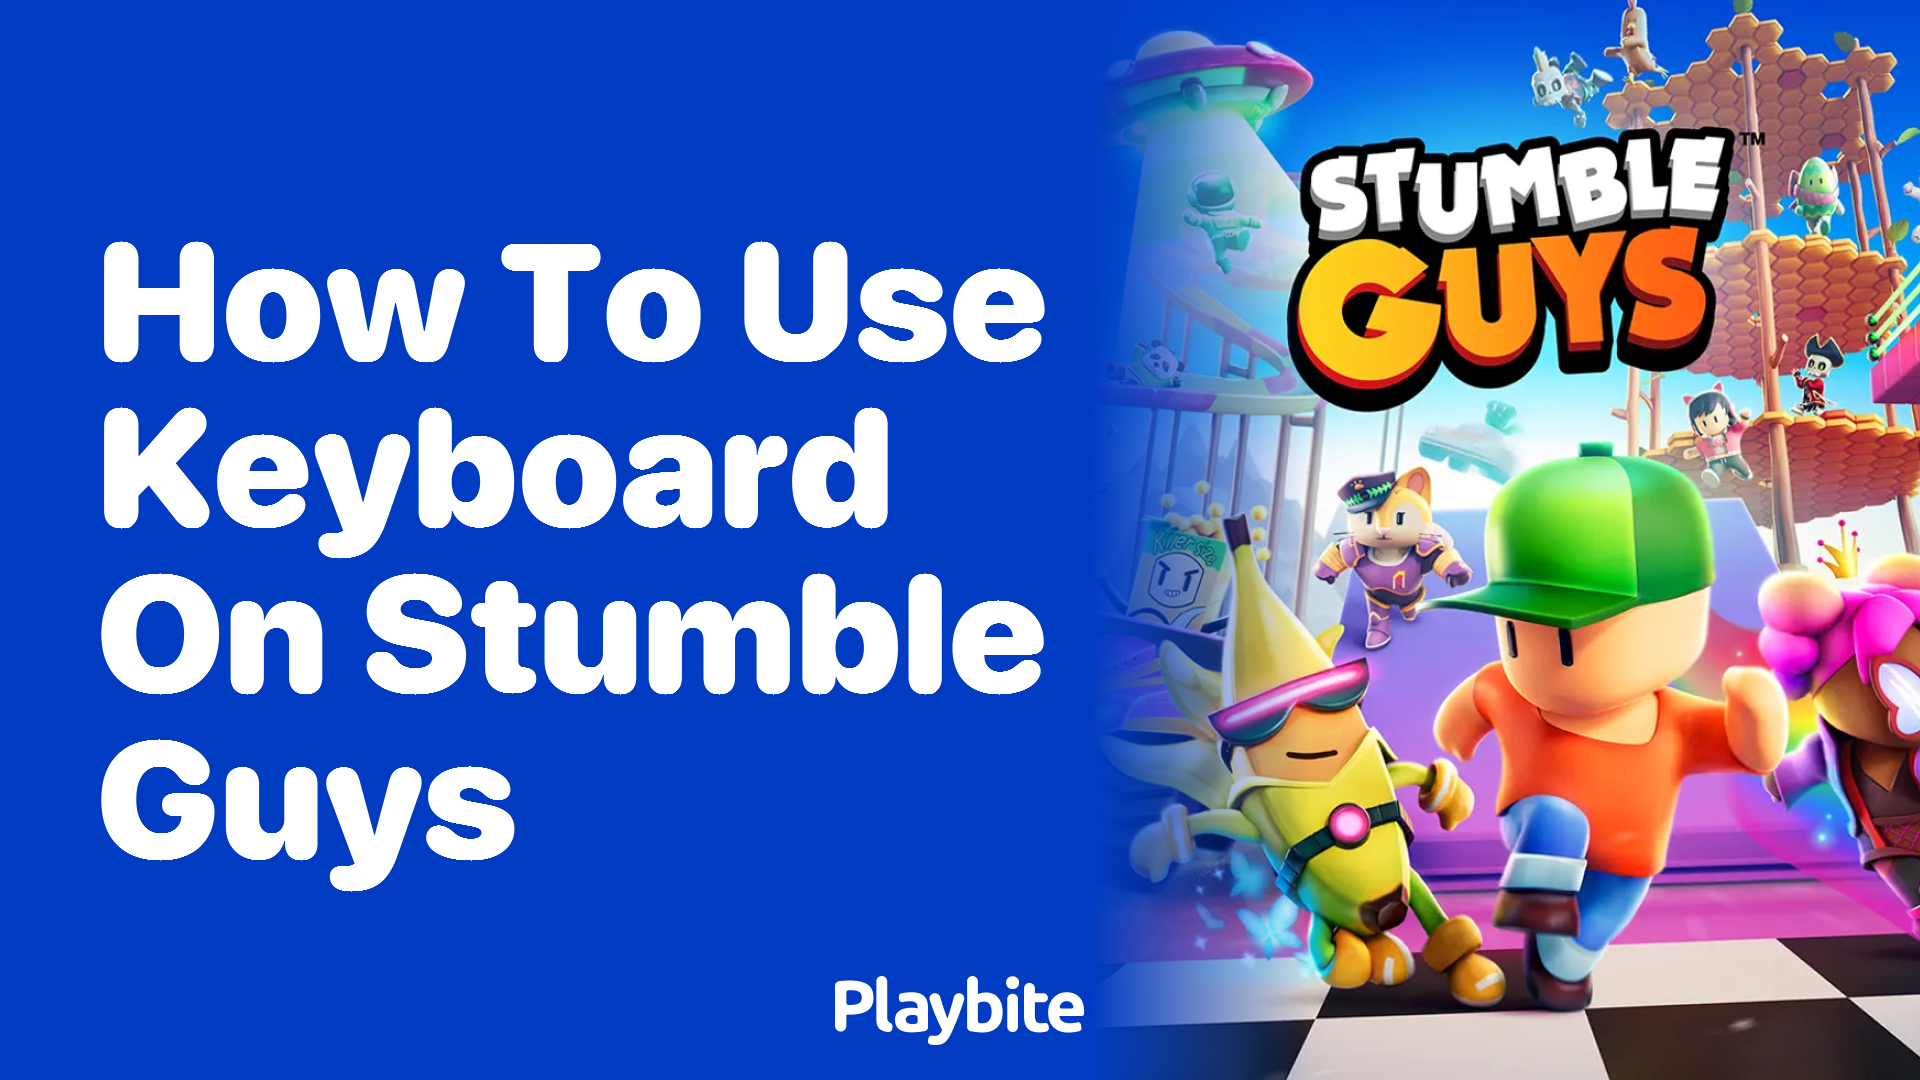 How to Use a Keyboard on Stumble Guys: A Fun Guide